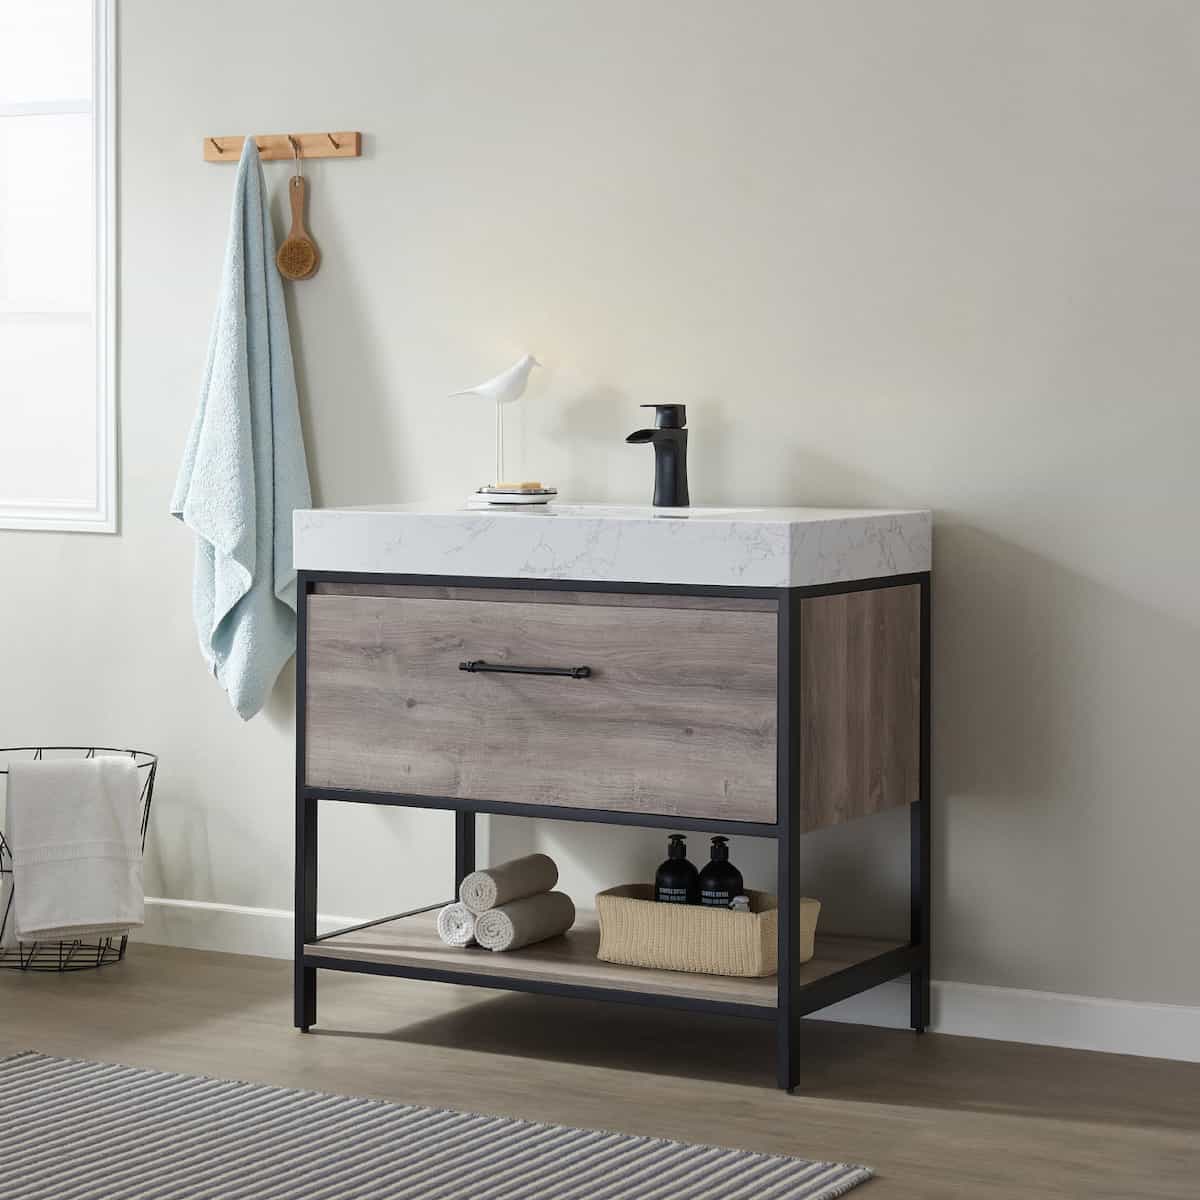 Vinnova Palma 36 Inch Freestanding Single Vanity In Mexican Oak with White Composite Grain Stone Countertop Without Mirror Side 701236-MXO-GW-NM